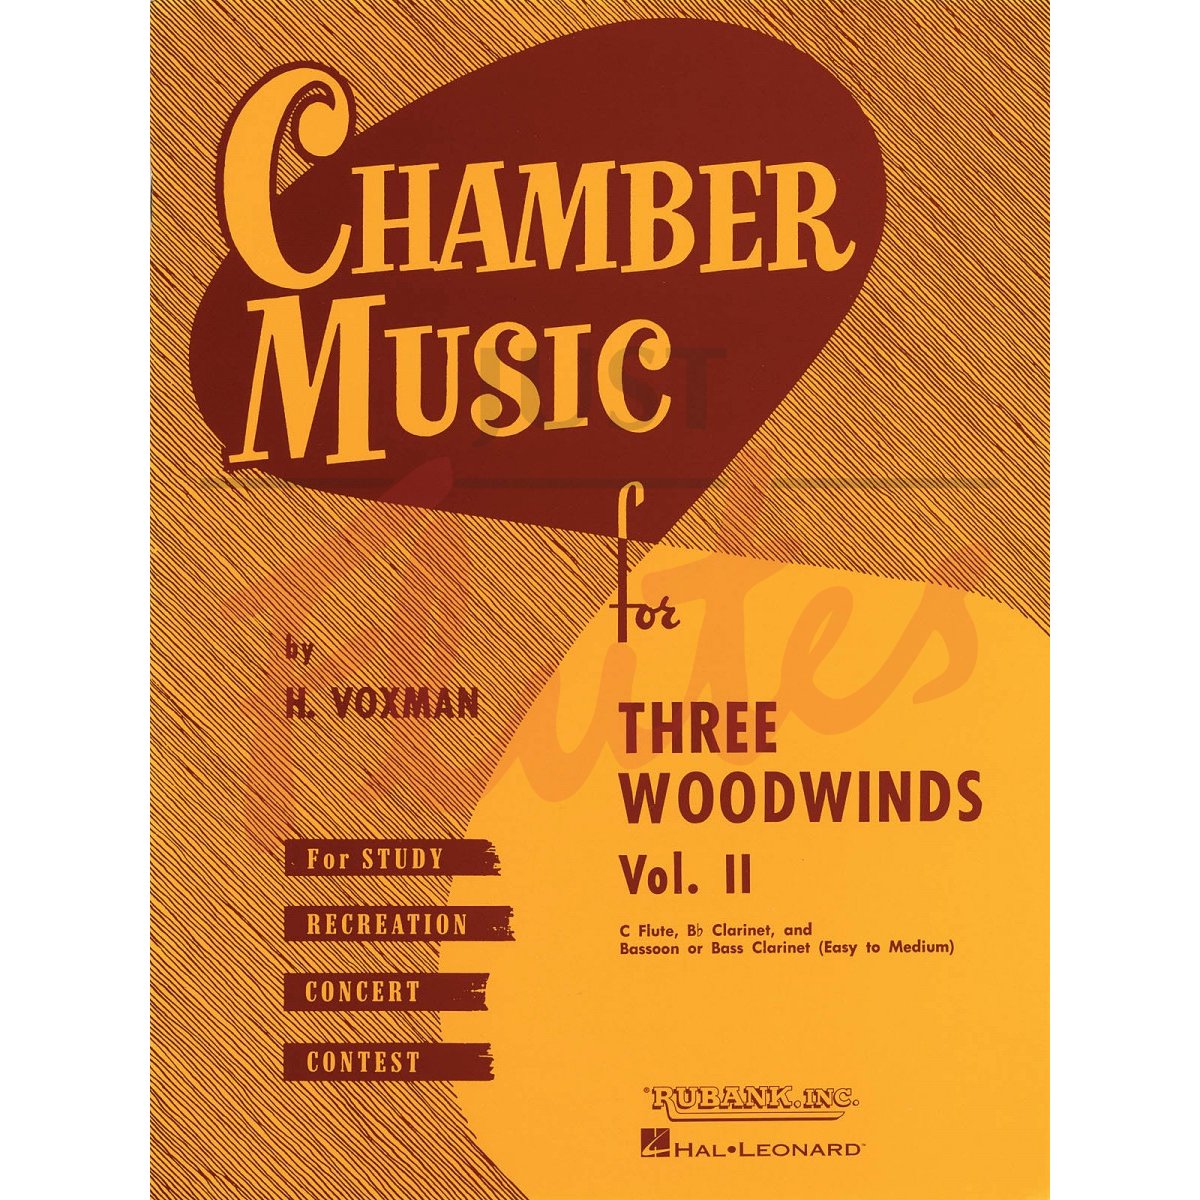 Chamber Music for Three Woodwinds, Vol 2